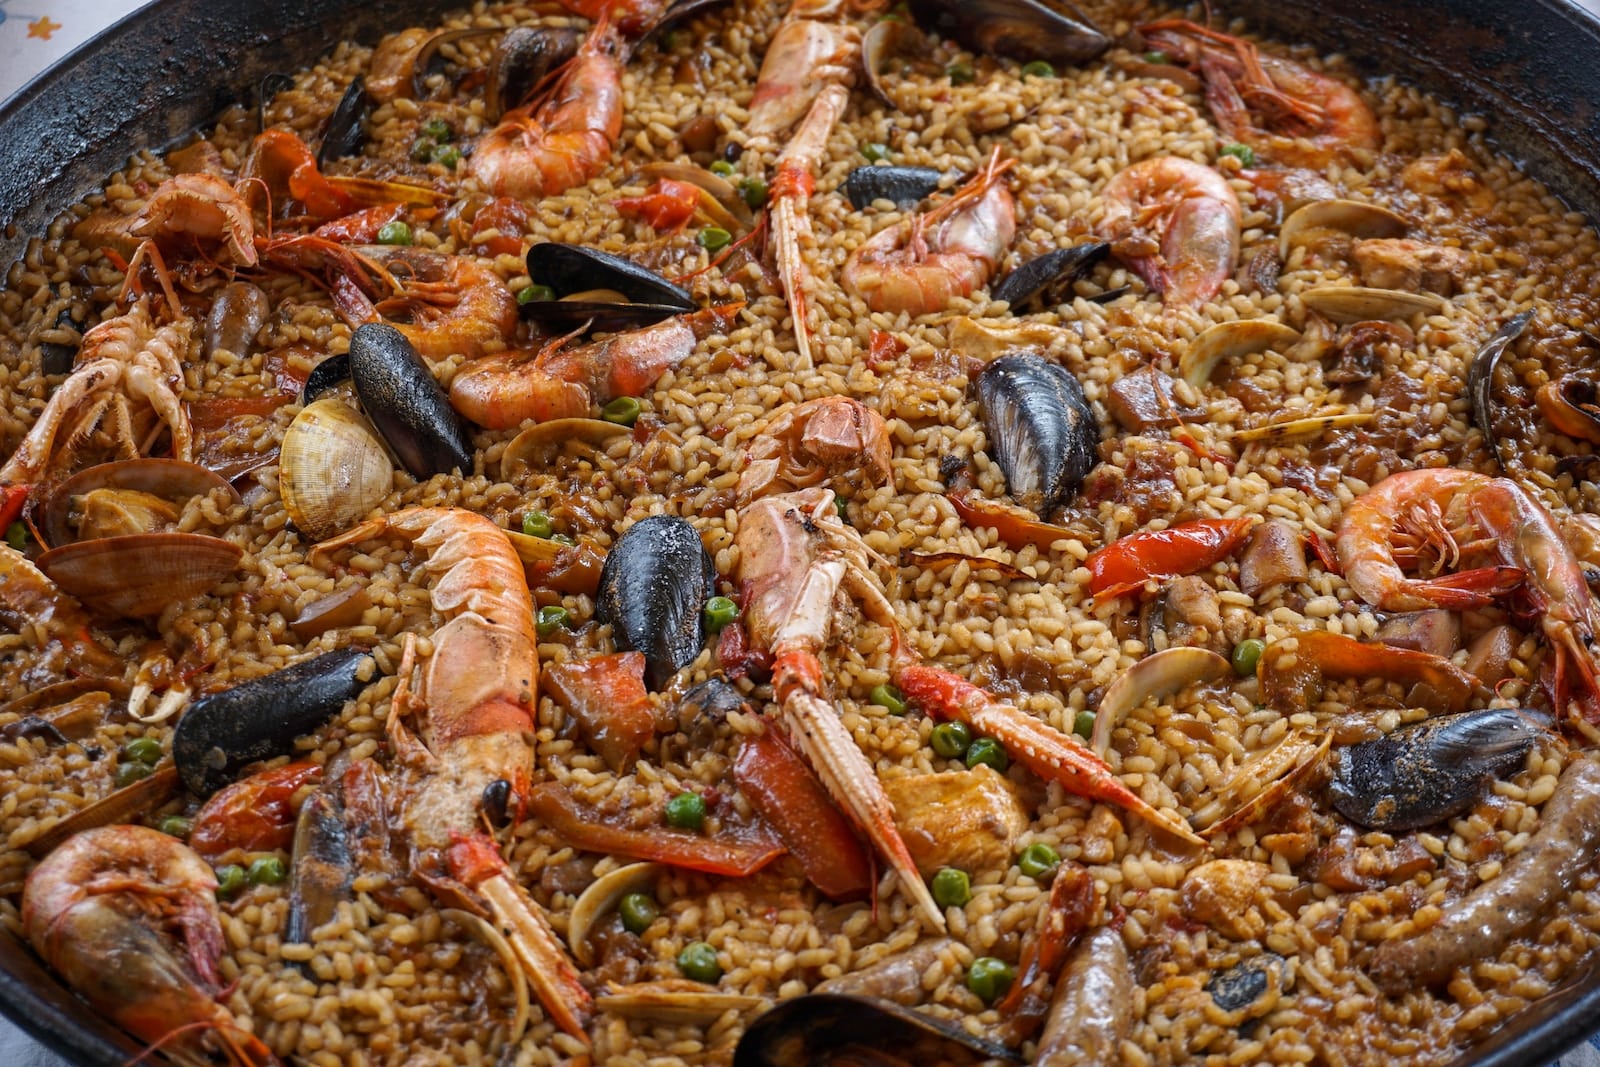 What is a paella and how to prepare and cook one?